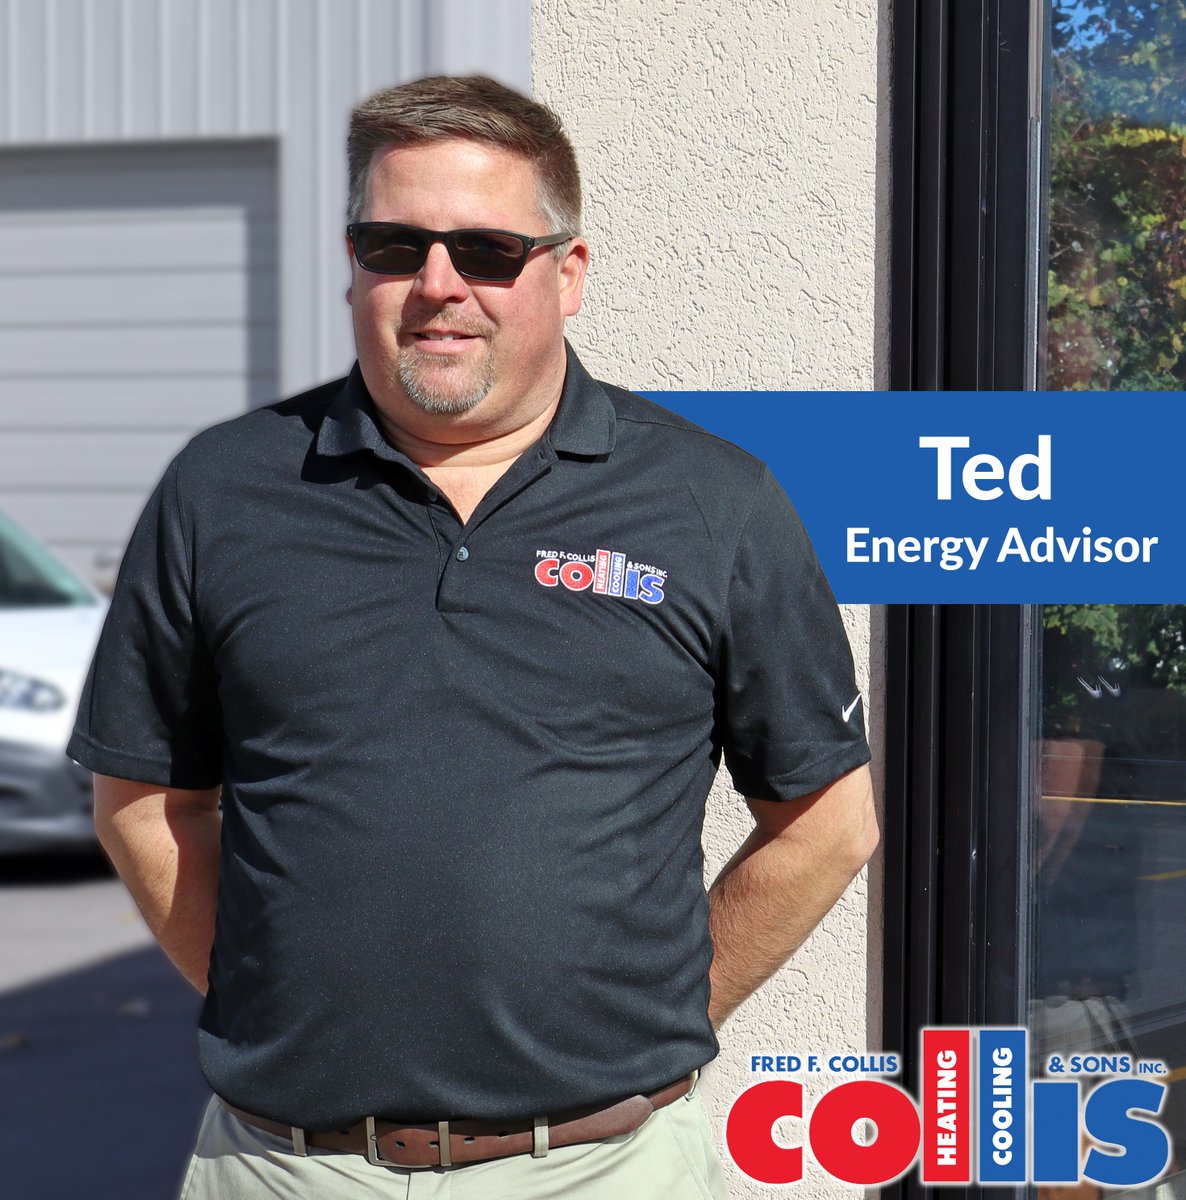 #EmployeeHighlight: Happy 1 Year #WorkAnniversary to Ted, one of our amazing #energy advisors! He truly cares about our customers & providing a thorough analysis of their homes to identify ways that they can increase their #EnergyEfficiency. Thank you for all that you do, Ted!